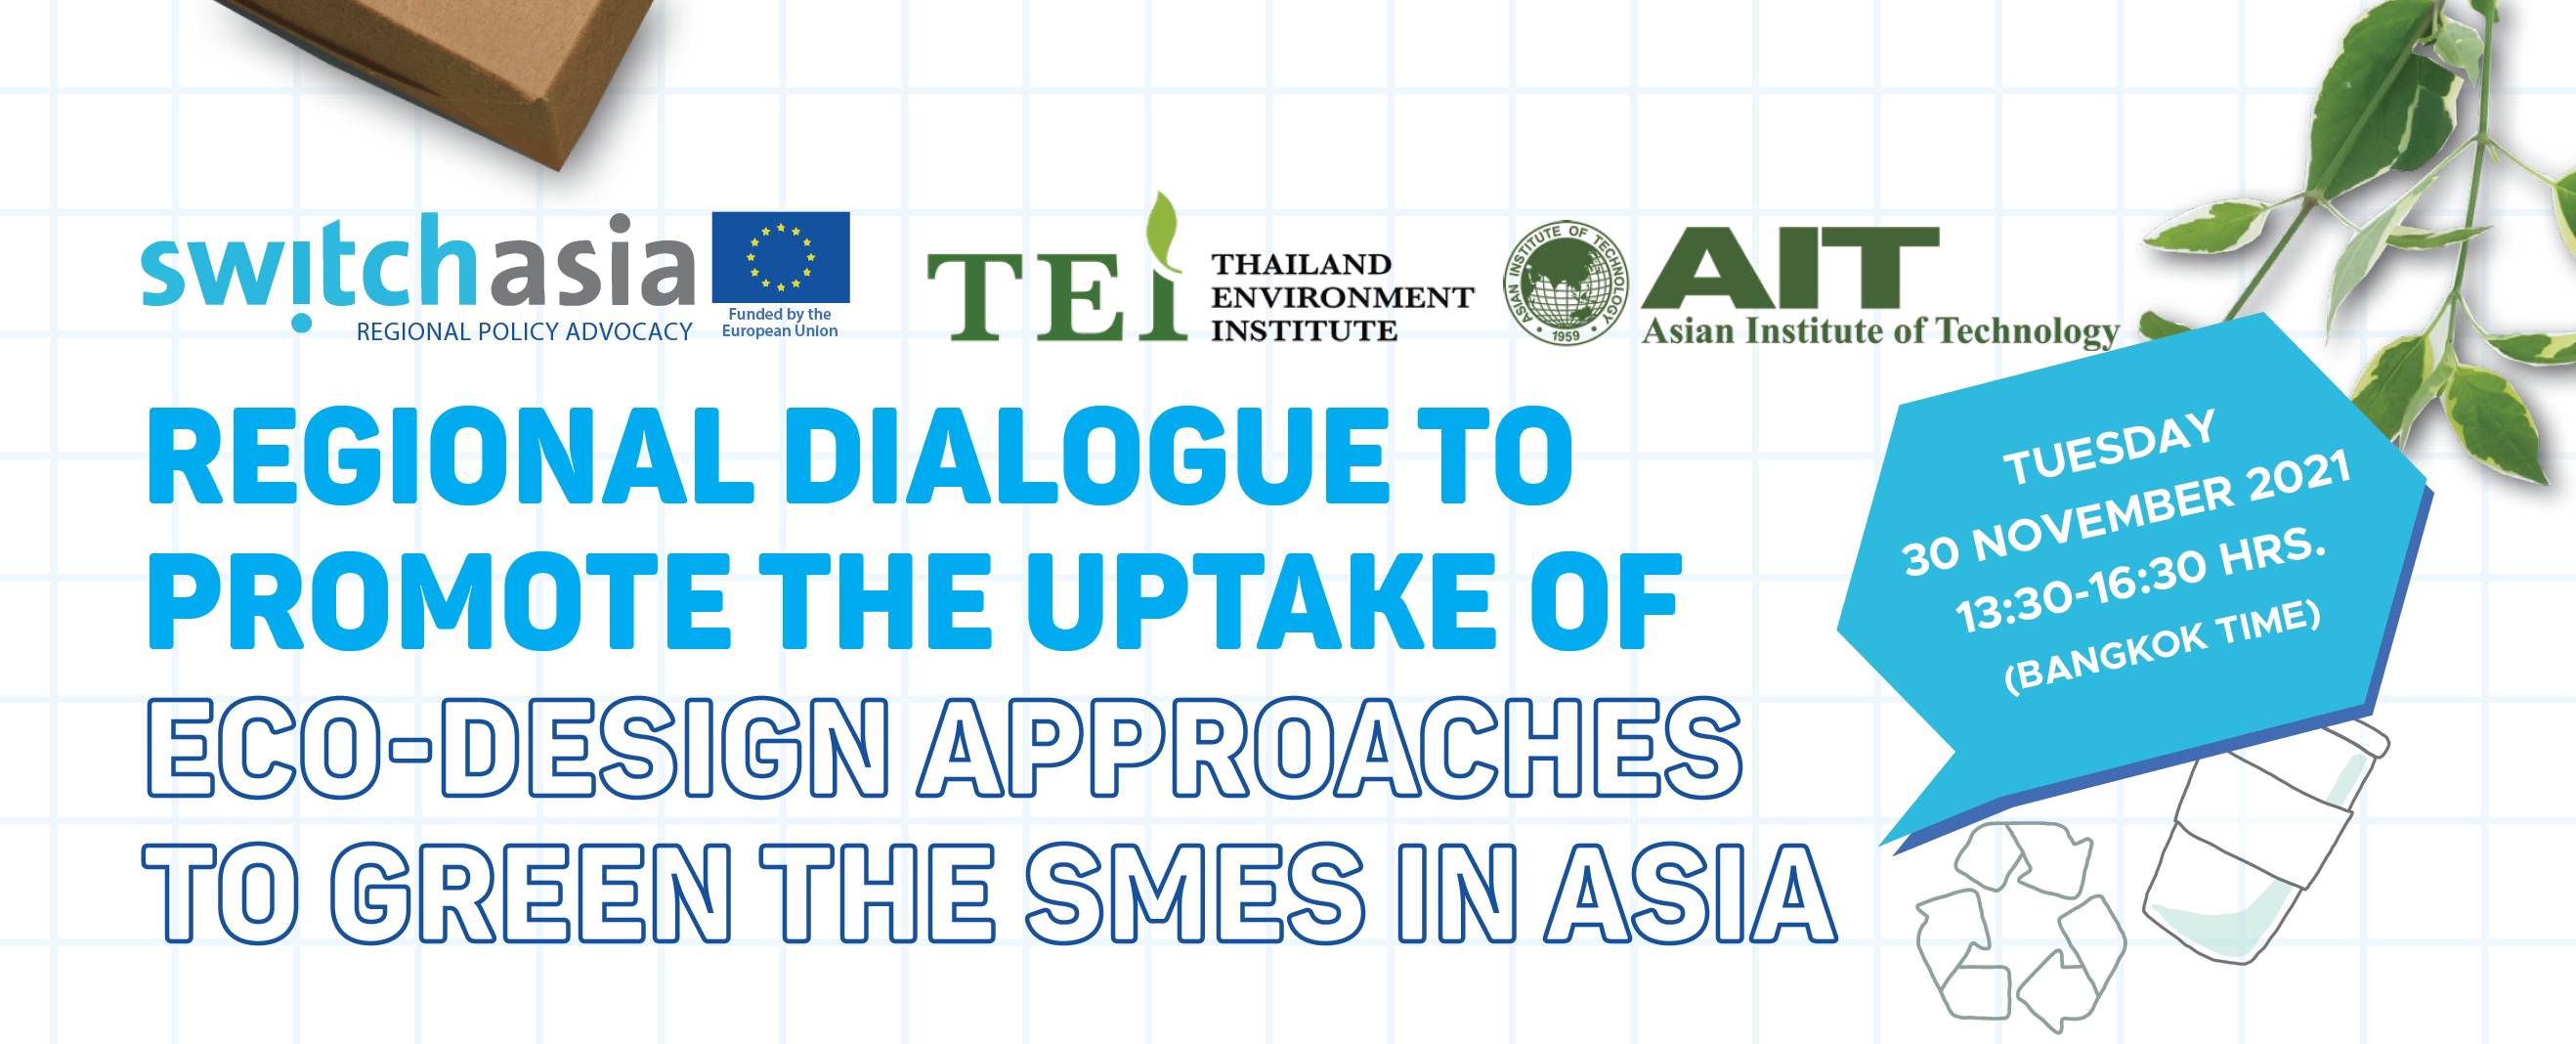 Regional dialogue to promote the uptake of eco-design approaches to green SMEs in Asia